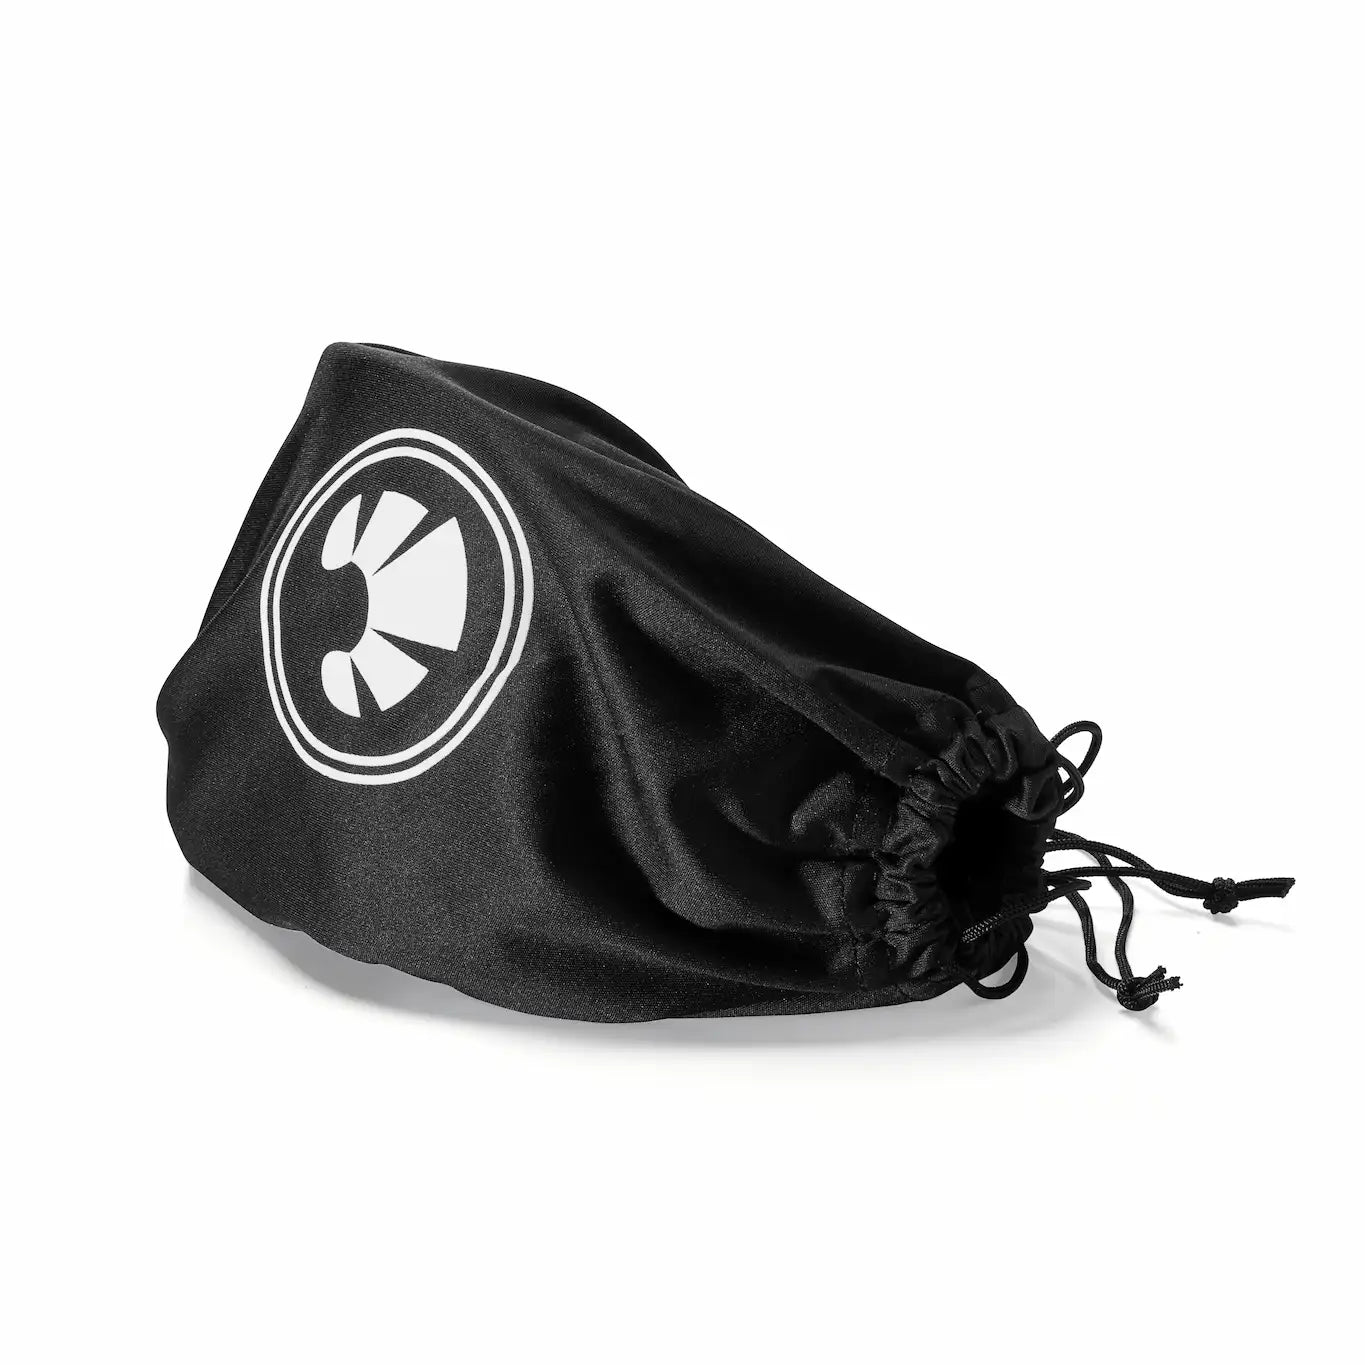 Bakedsnow snowboard goggle pouch